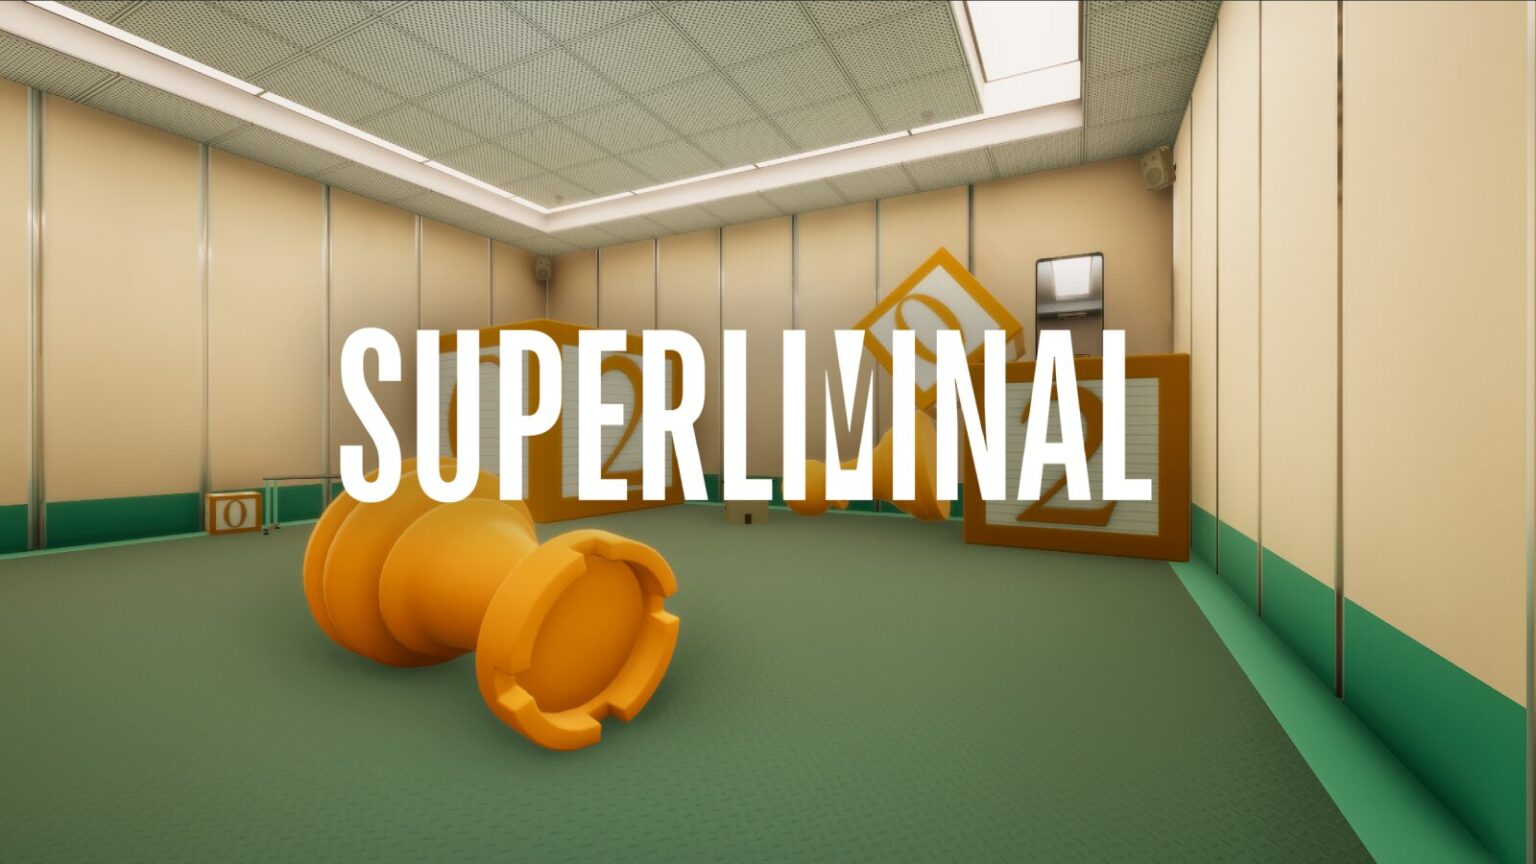 Superliminal Mobile game with giant chess pieces and optical illusions